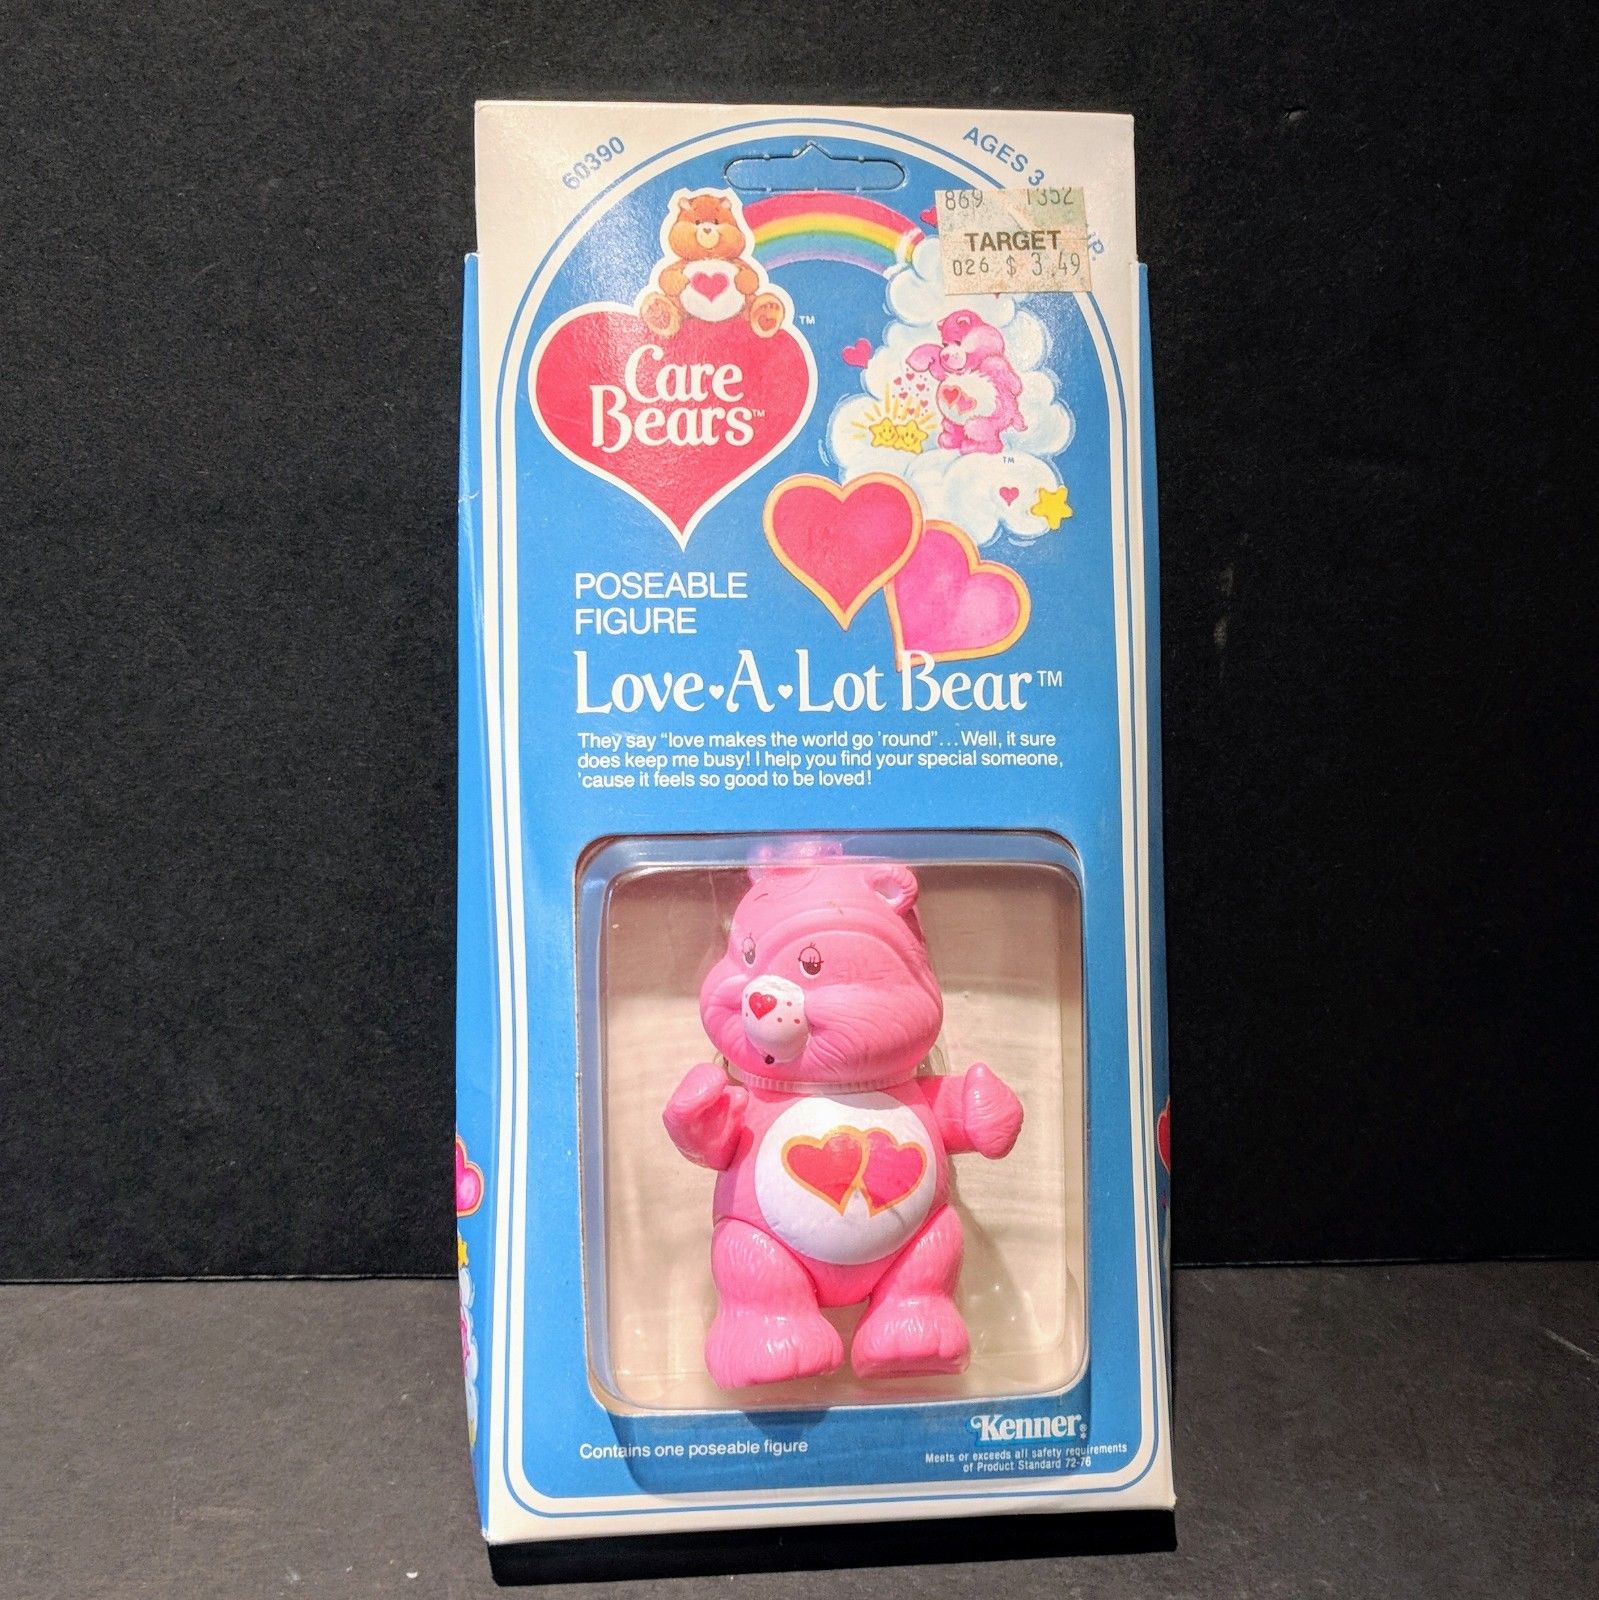 VTG LOVE-a-LOT BEAR CareBears Care Bears SEALED NOS unpunched rare 1982 60390